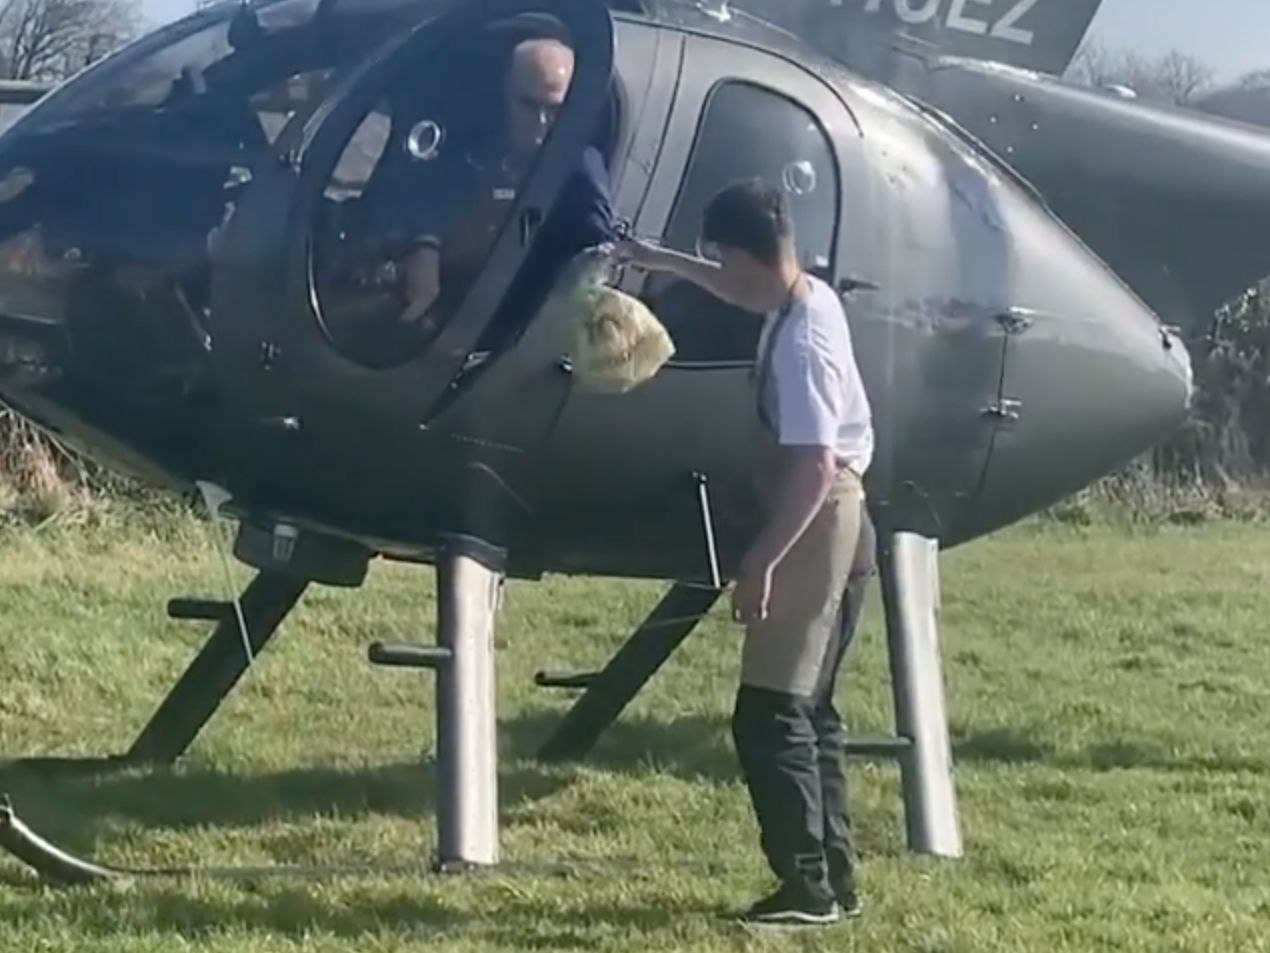 Helicopter pilot flies from Salford to Preston and back for beef sandwich, The Manc